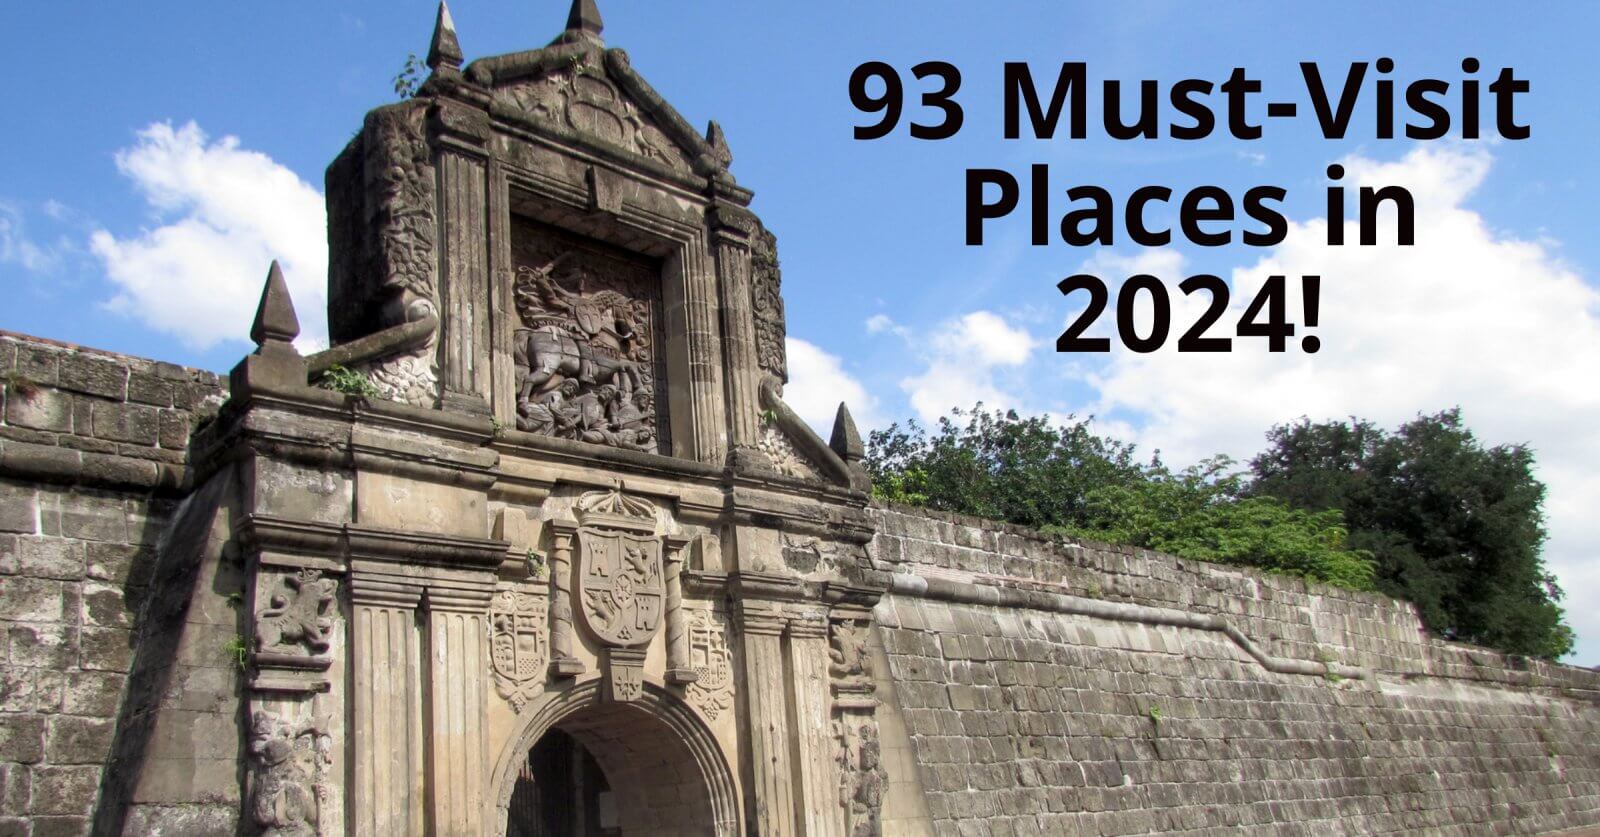 ultimate must visit places in metro manila and the philippines in 2014.